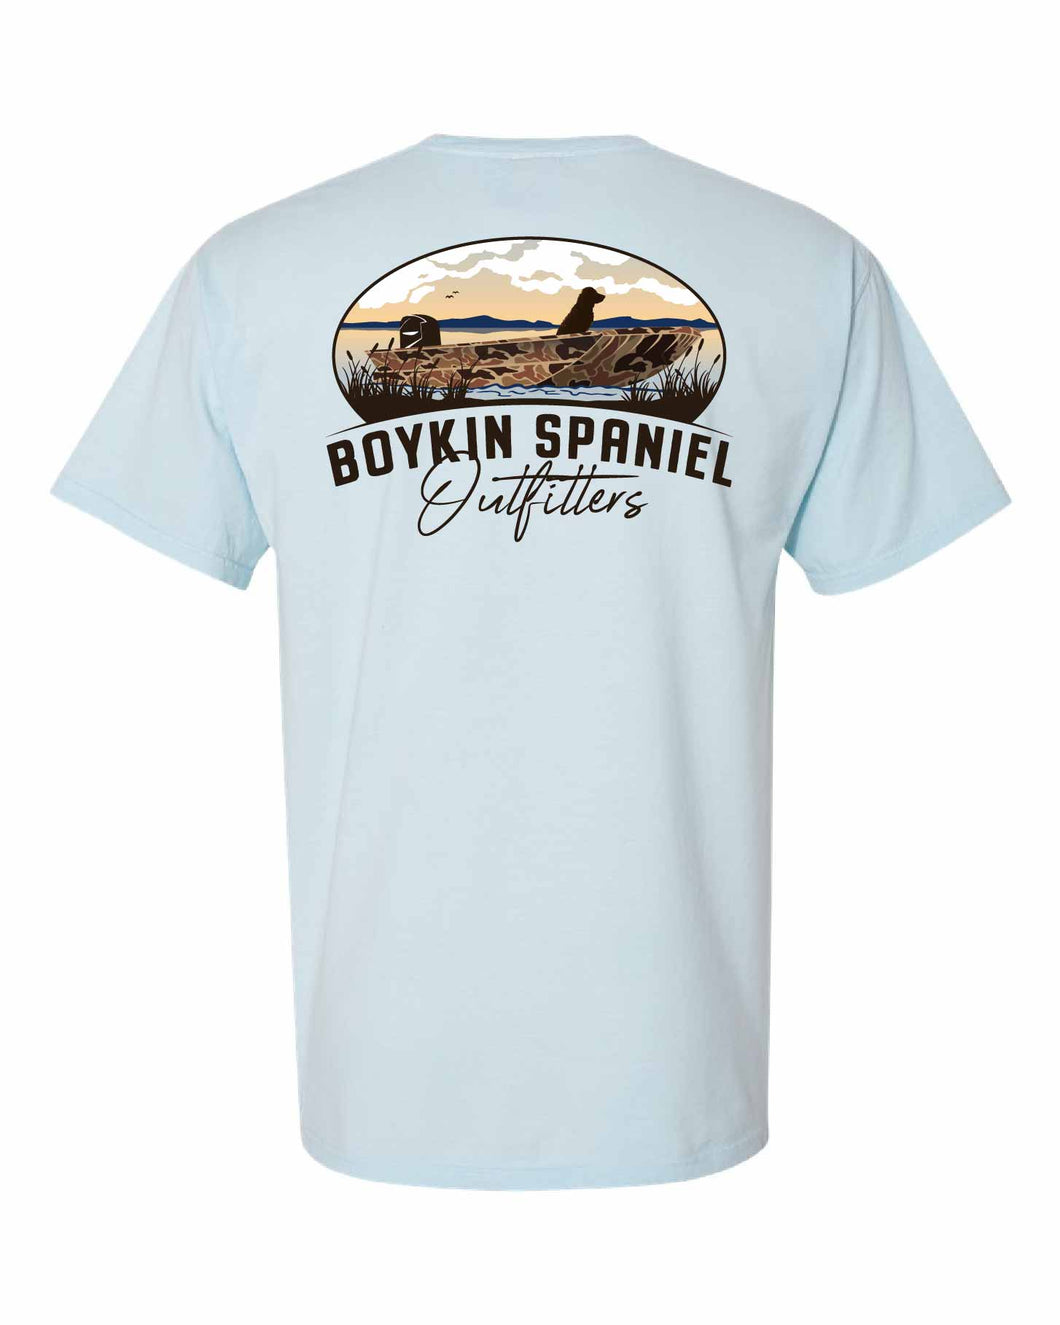 Youth Comfort Colors ® Heavyweight Ring Spun Tee - Boykin Spaniel in Boat